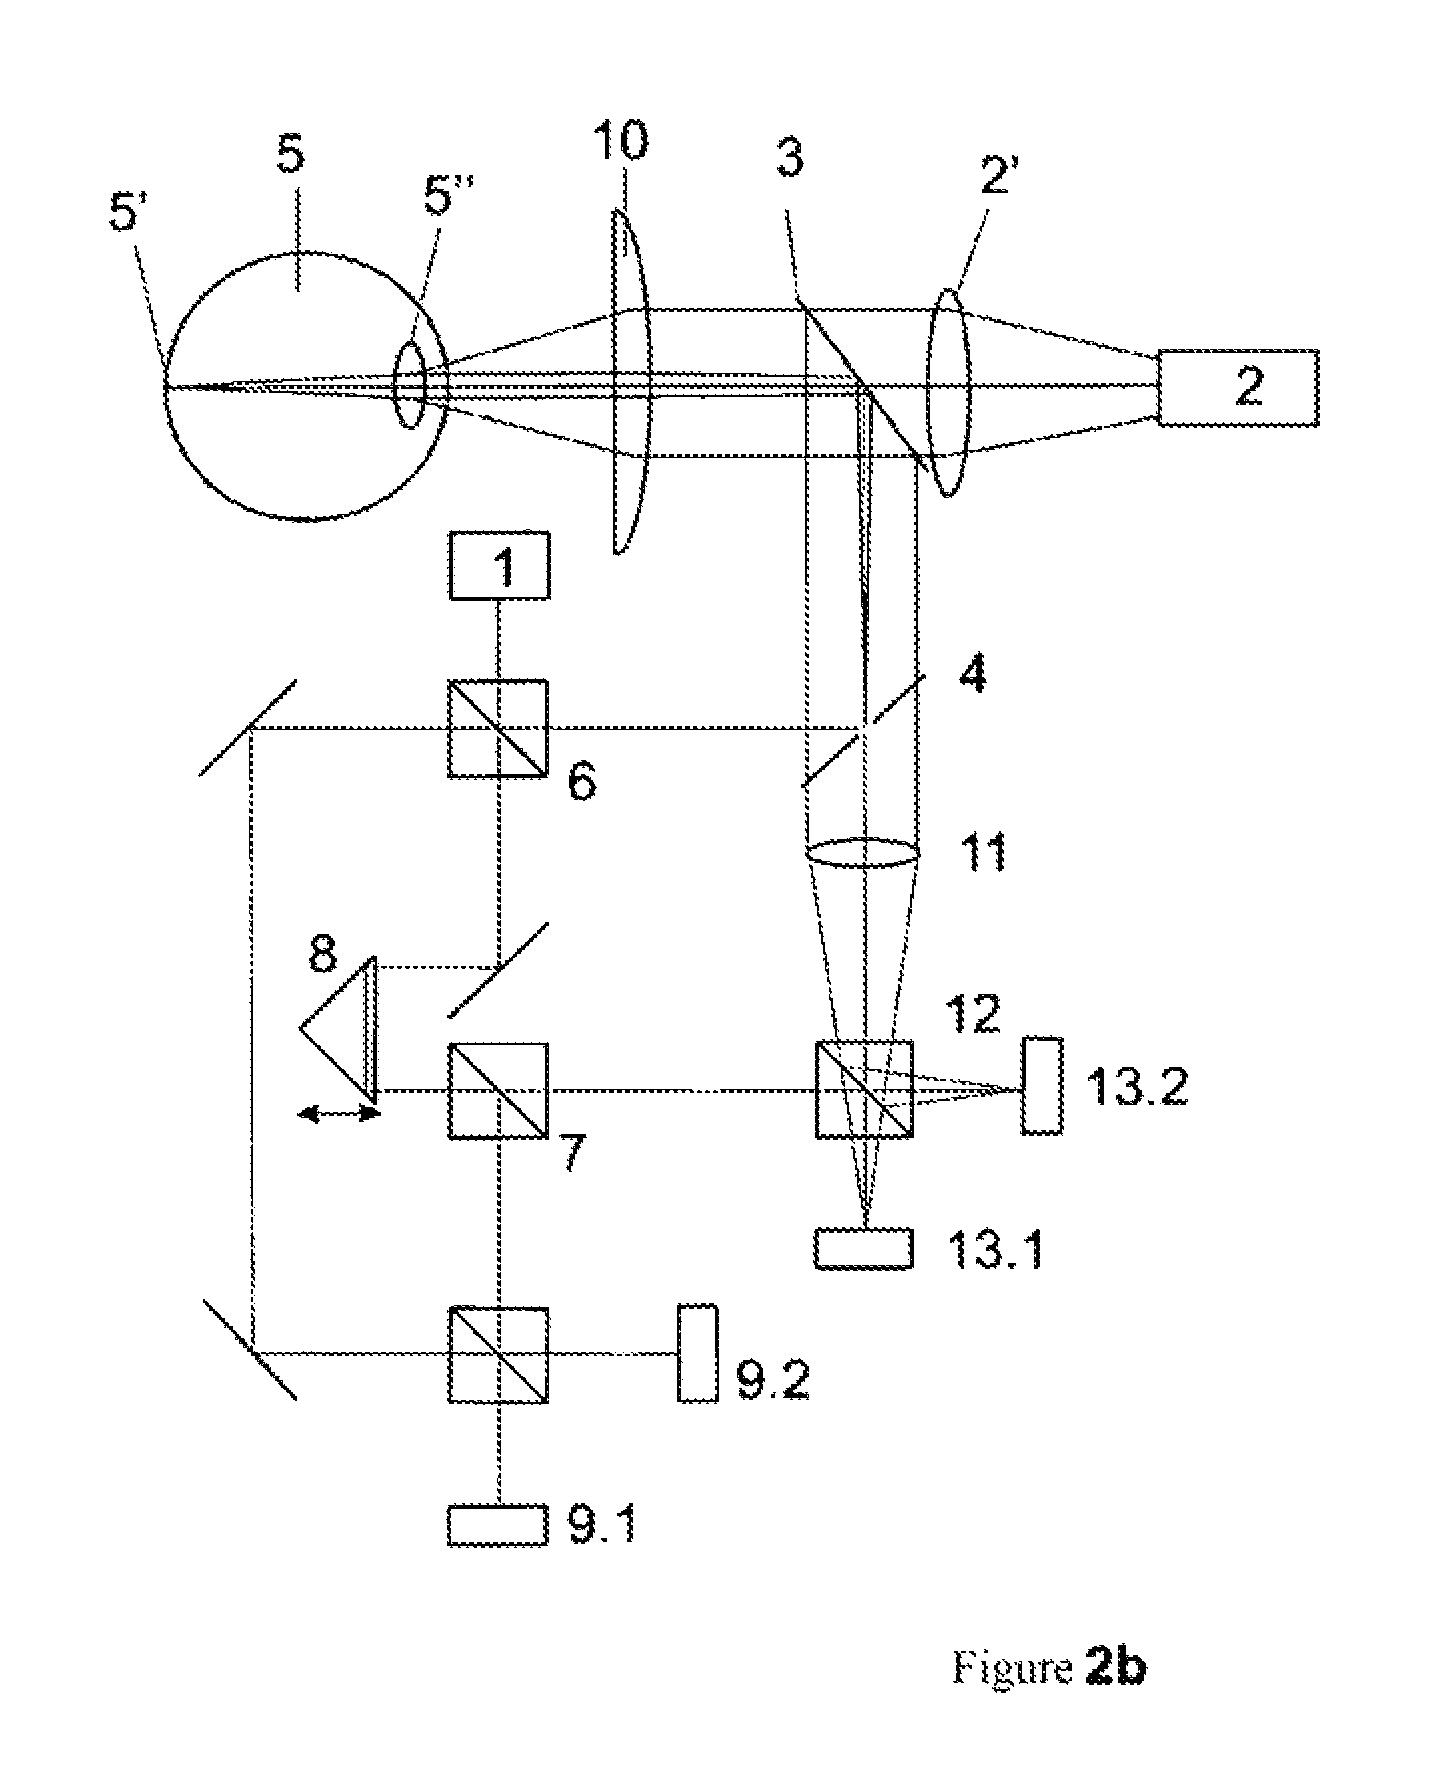 Device for interferometrically measuring the eye length and the anterior eye segment